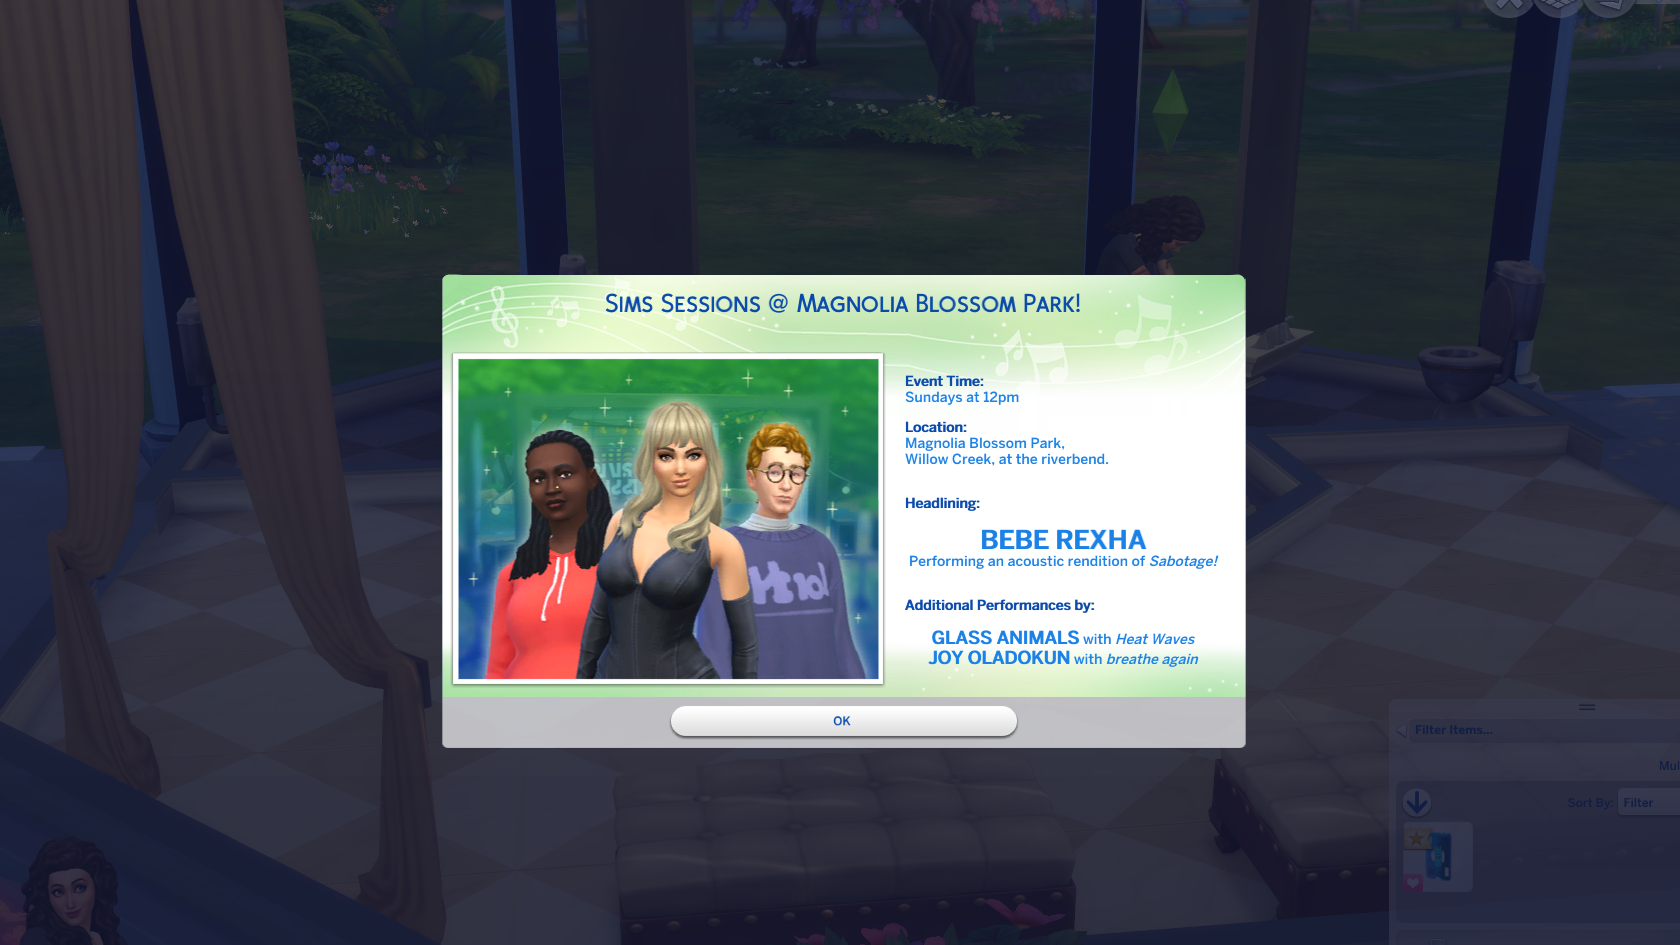 A Sims 4 on-screen pop up that says: Sims Sessions at Magnolia Blossom Park. Event time: Sundays at 12pm. Location: Magnolia Blossom Park, Willow Creek, at the riverbend. Headlining: Bebe Rexha, performing an acoustic rendition of Sabotage. Additional Performances by Glass Animals, with Heat Waves, and Joy Oladokun with Breathe Again.